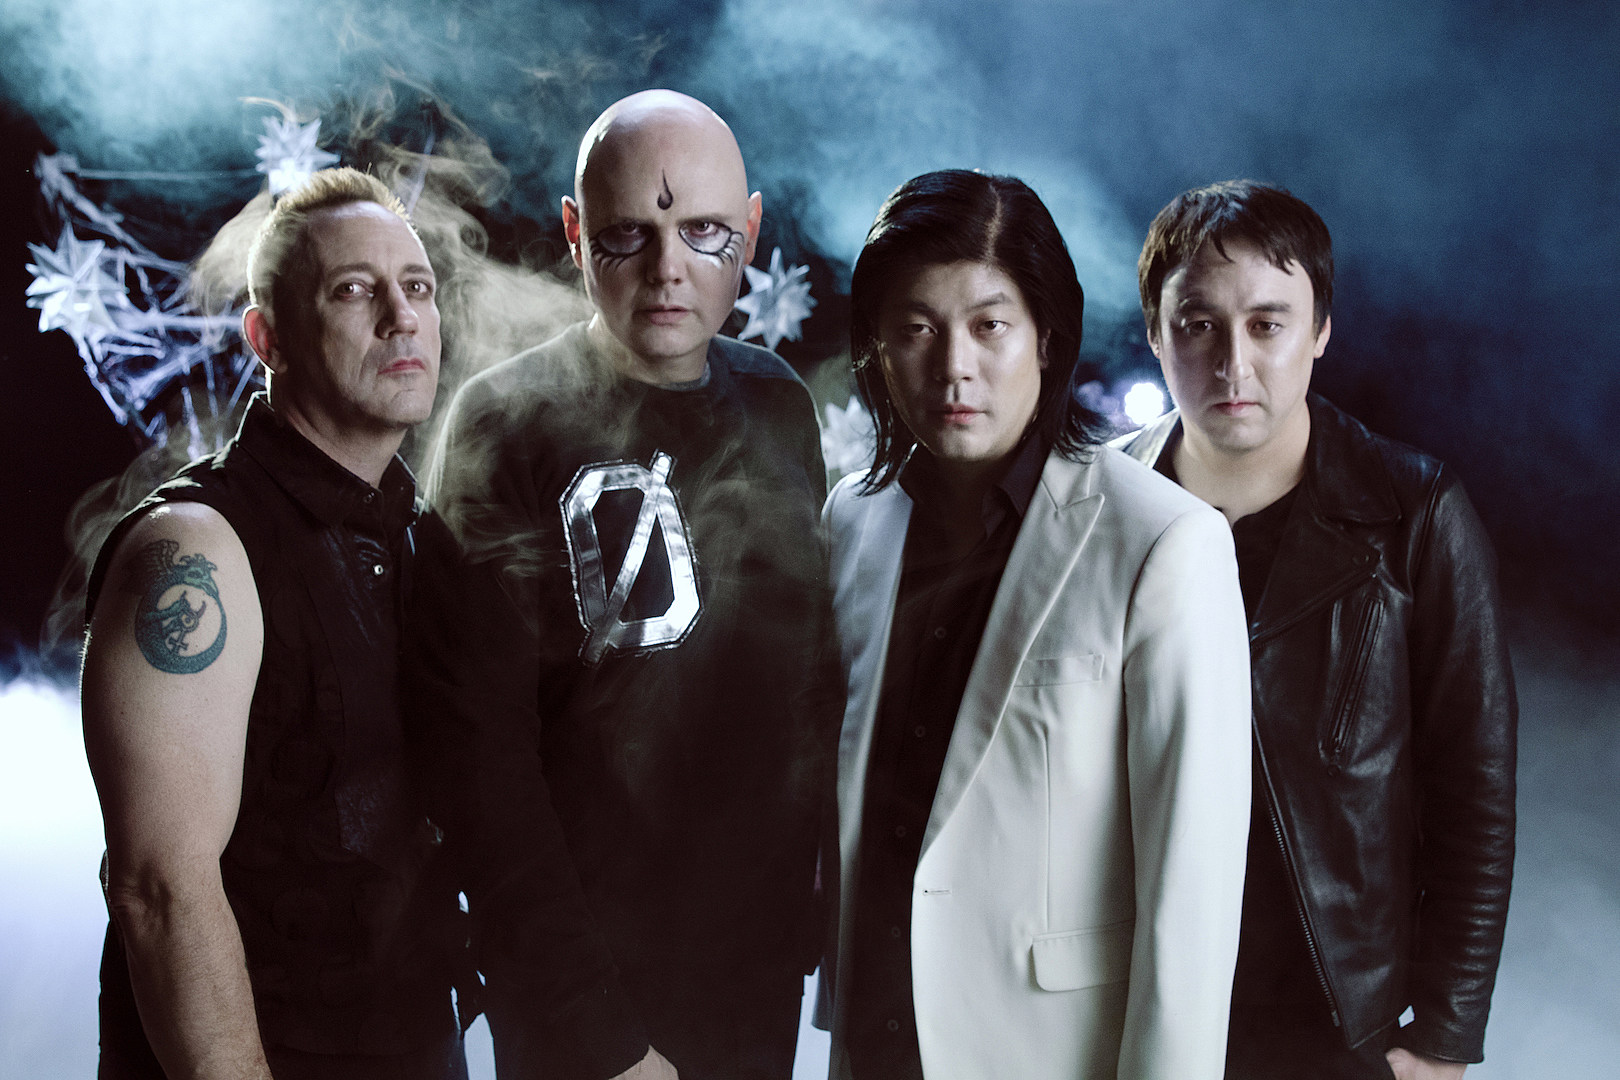 The Smashing Pumpkins - Official Site